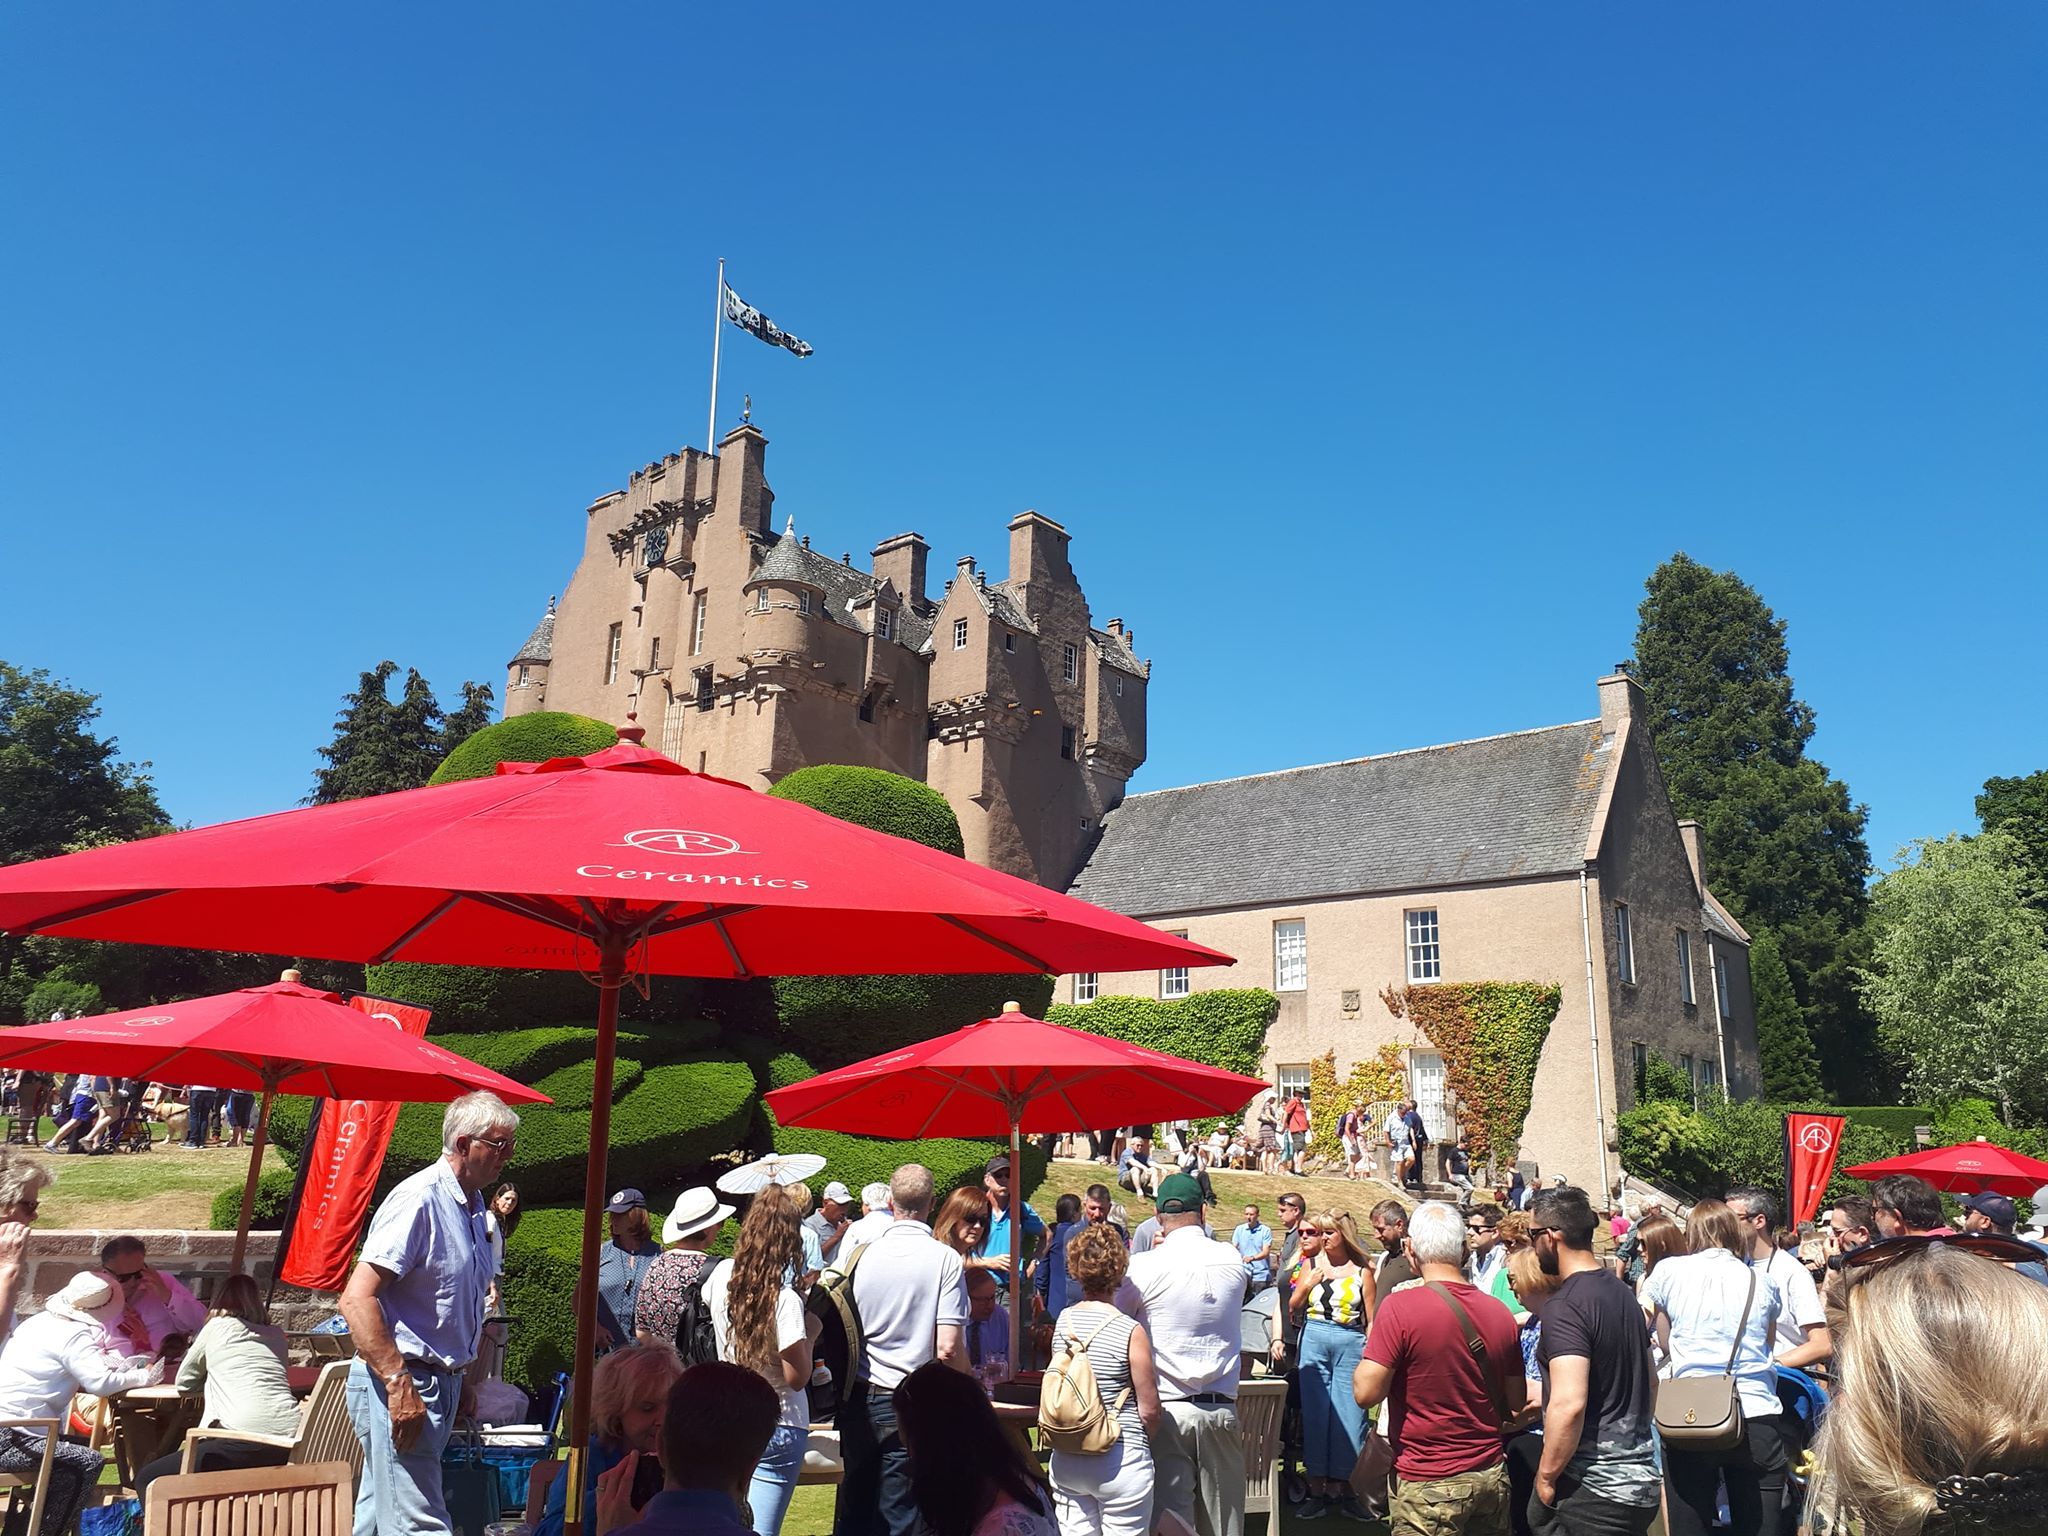 Thousands of people flocked to Crathes Castle for the BBC's Antique Road Show as they set up filming for two new episodes.